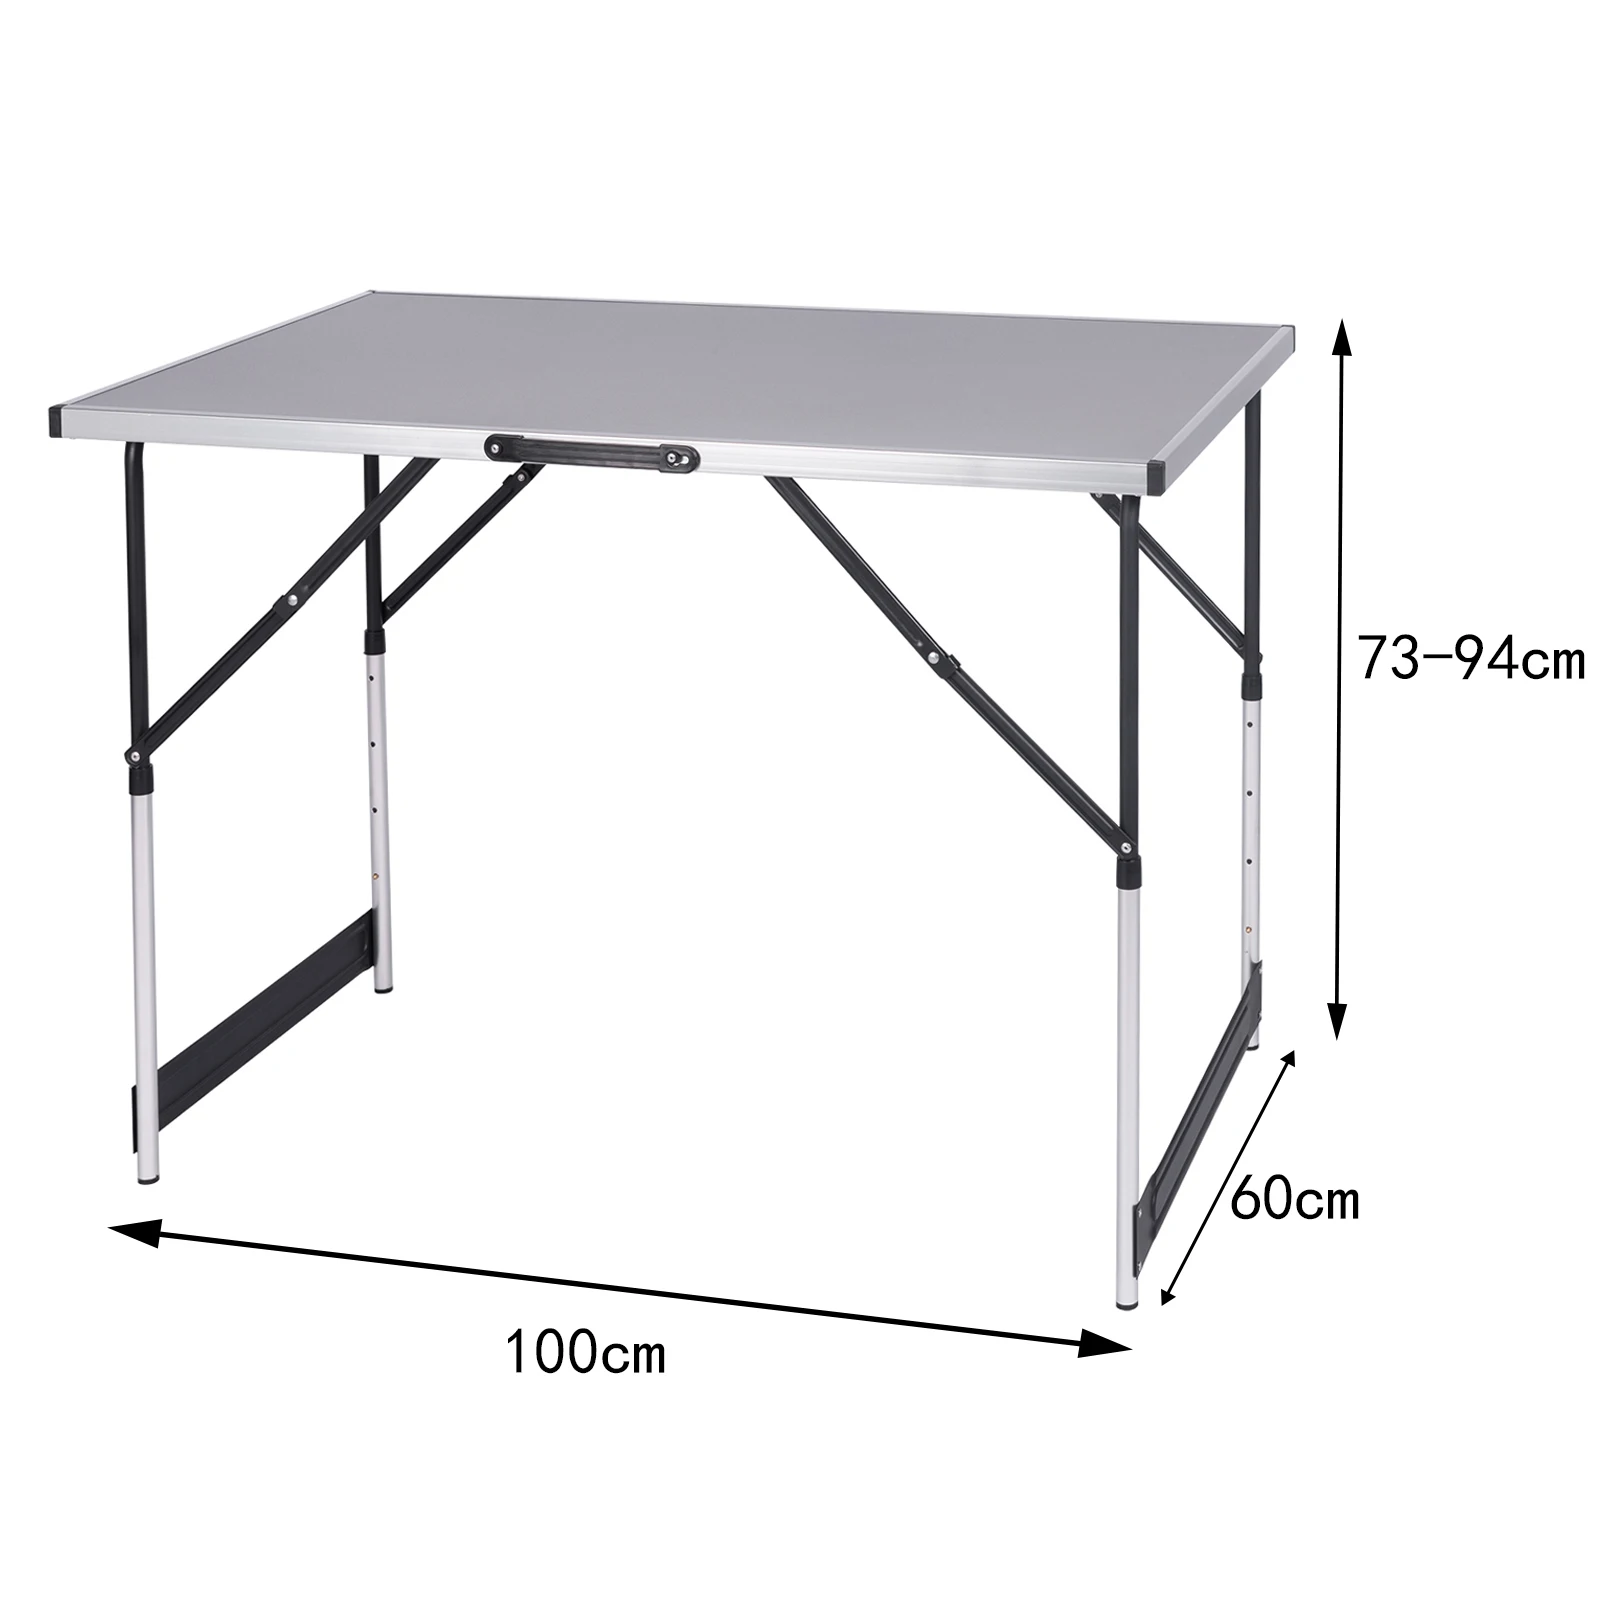 

Aluminum MDF Steel Folding Camping Table Foldable Outdoor Dinner Desk Garden Work Balcony Table For Family Party Picnic BBQ